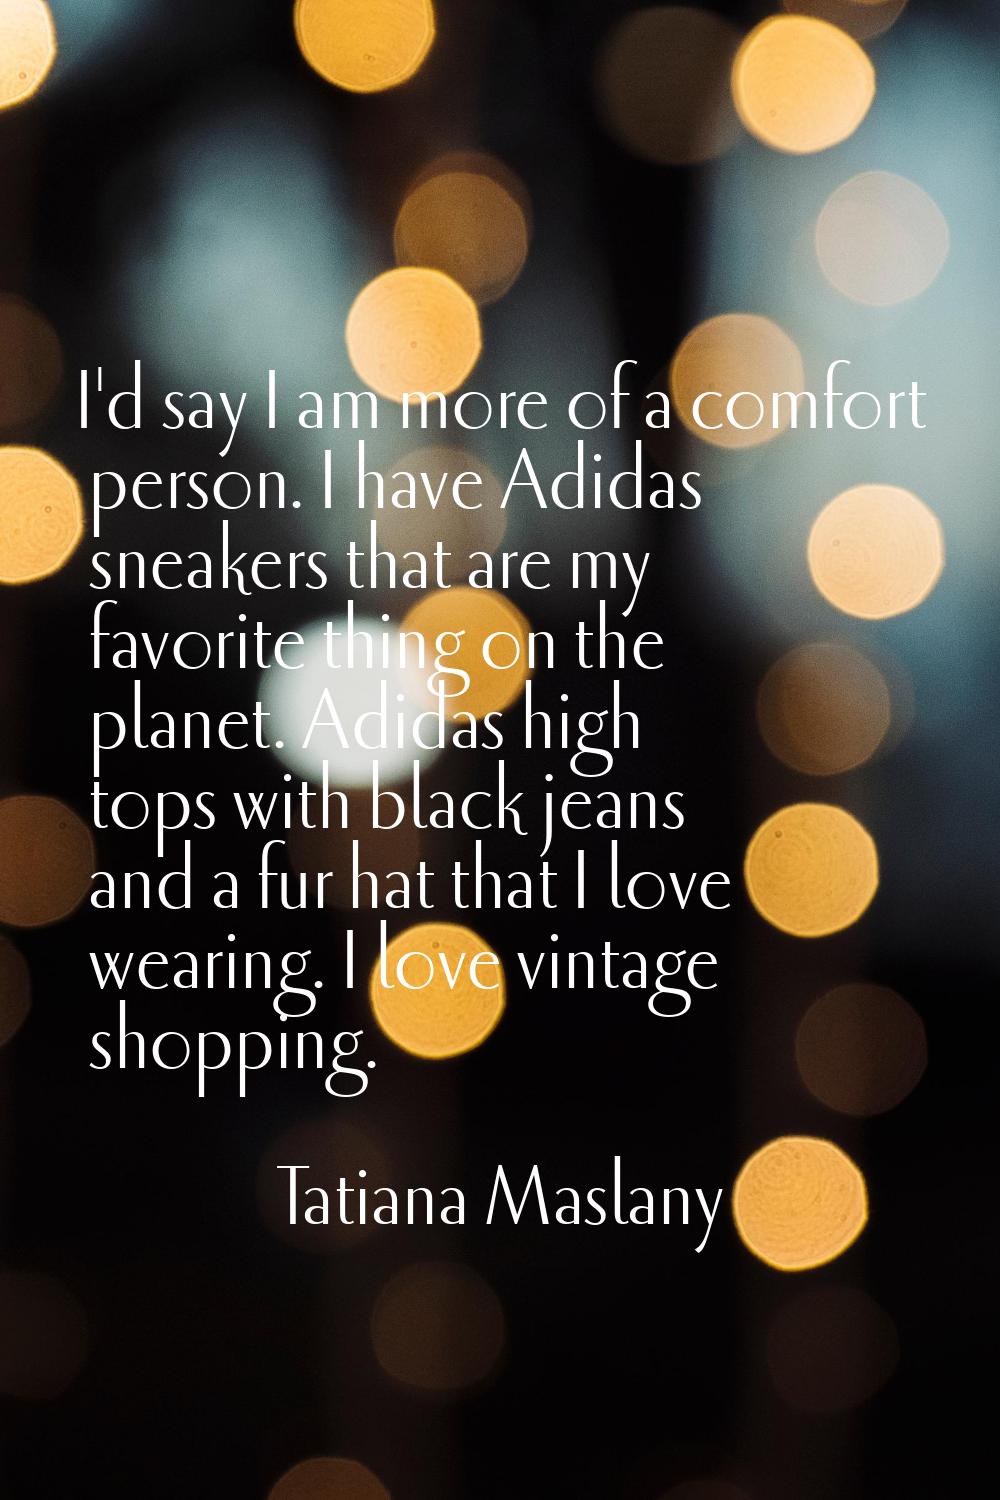 I'd say I am more of a comfort person. I have Adidas sneakers that are my favorite thing on the pla